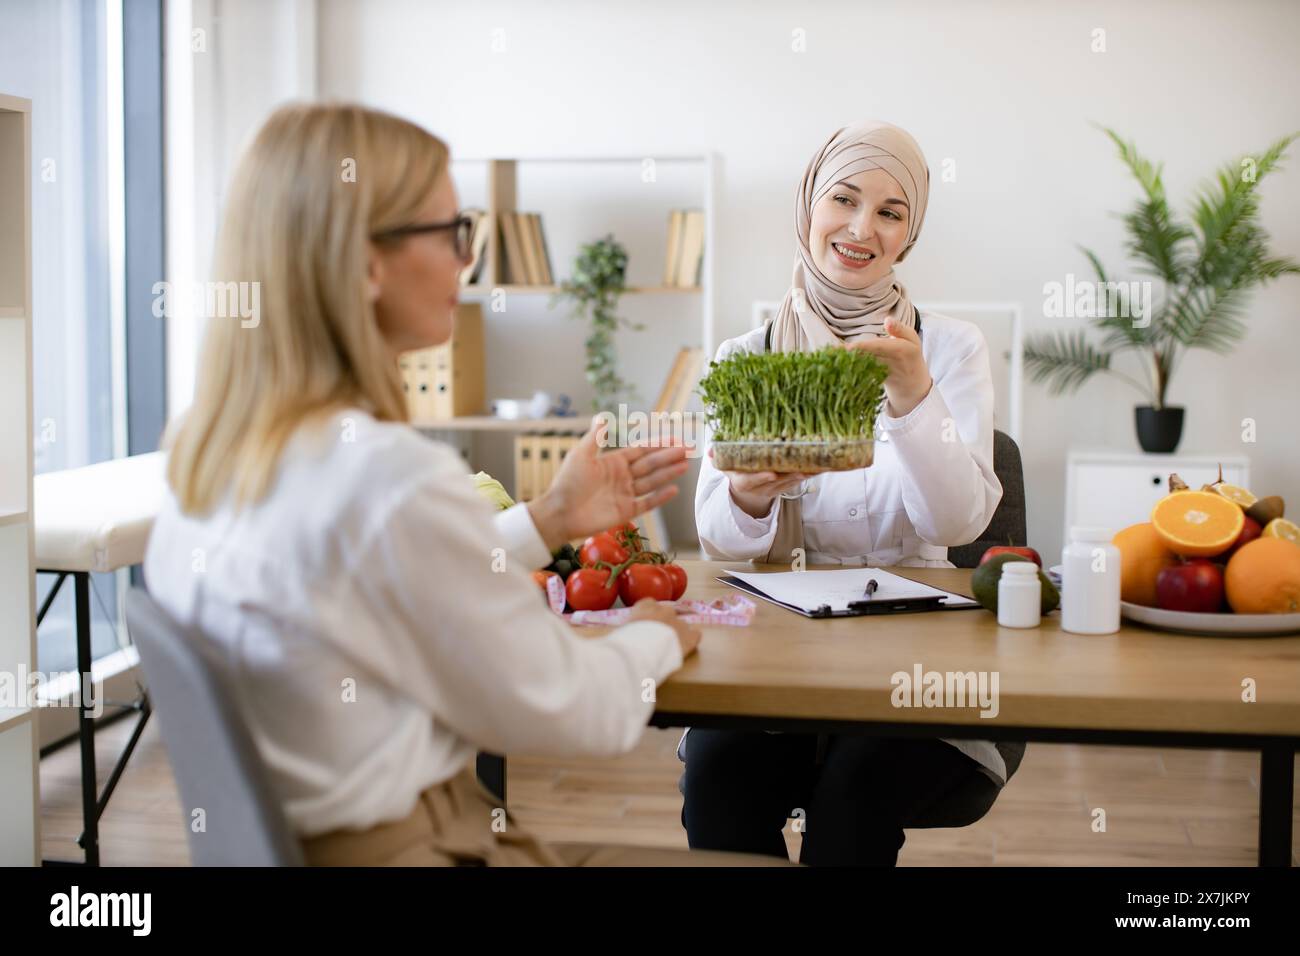 Mature lady sitting on appointment with muslim female nutritionist making healthy eating plan. Beautiful female doctor holding microgreen while adding Stock Photo